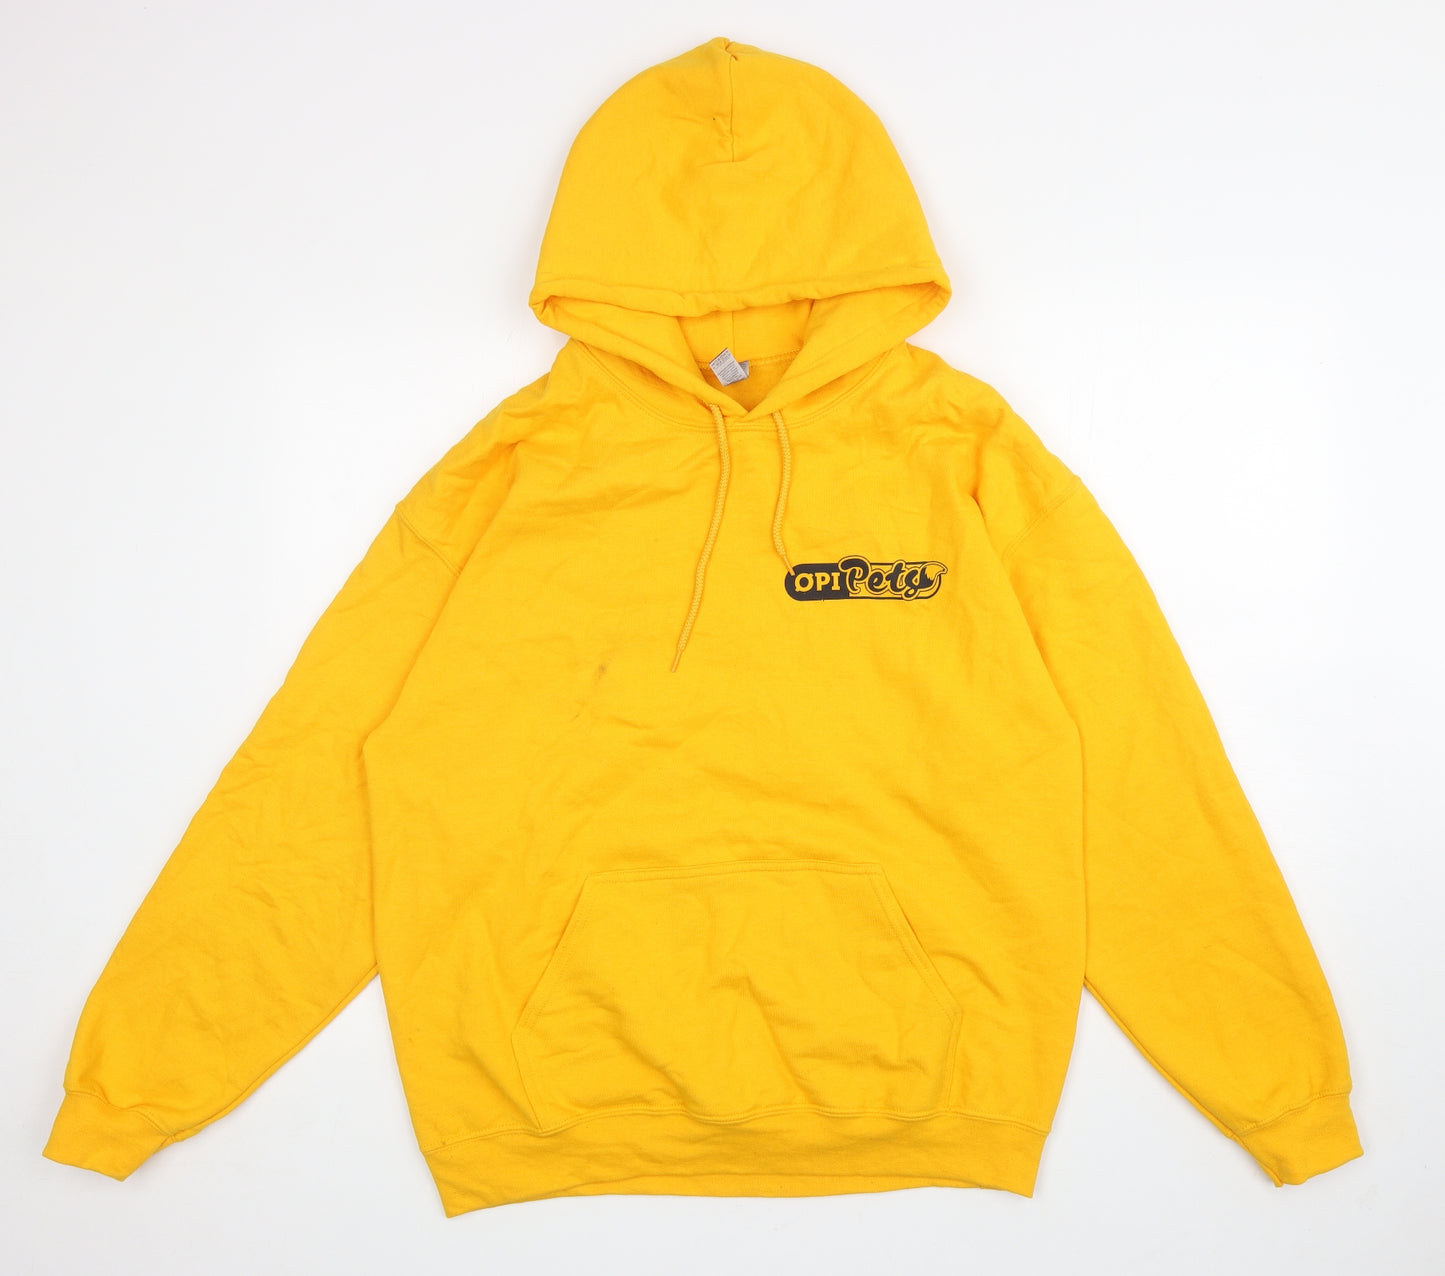 Gildan Mens Yellow Cotton Pullover Hoodie Size L - Opi Pets